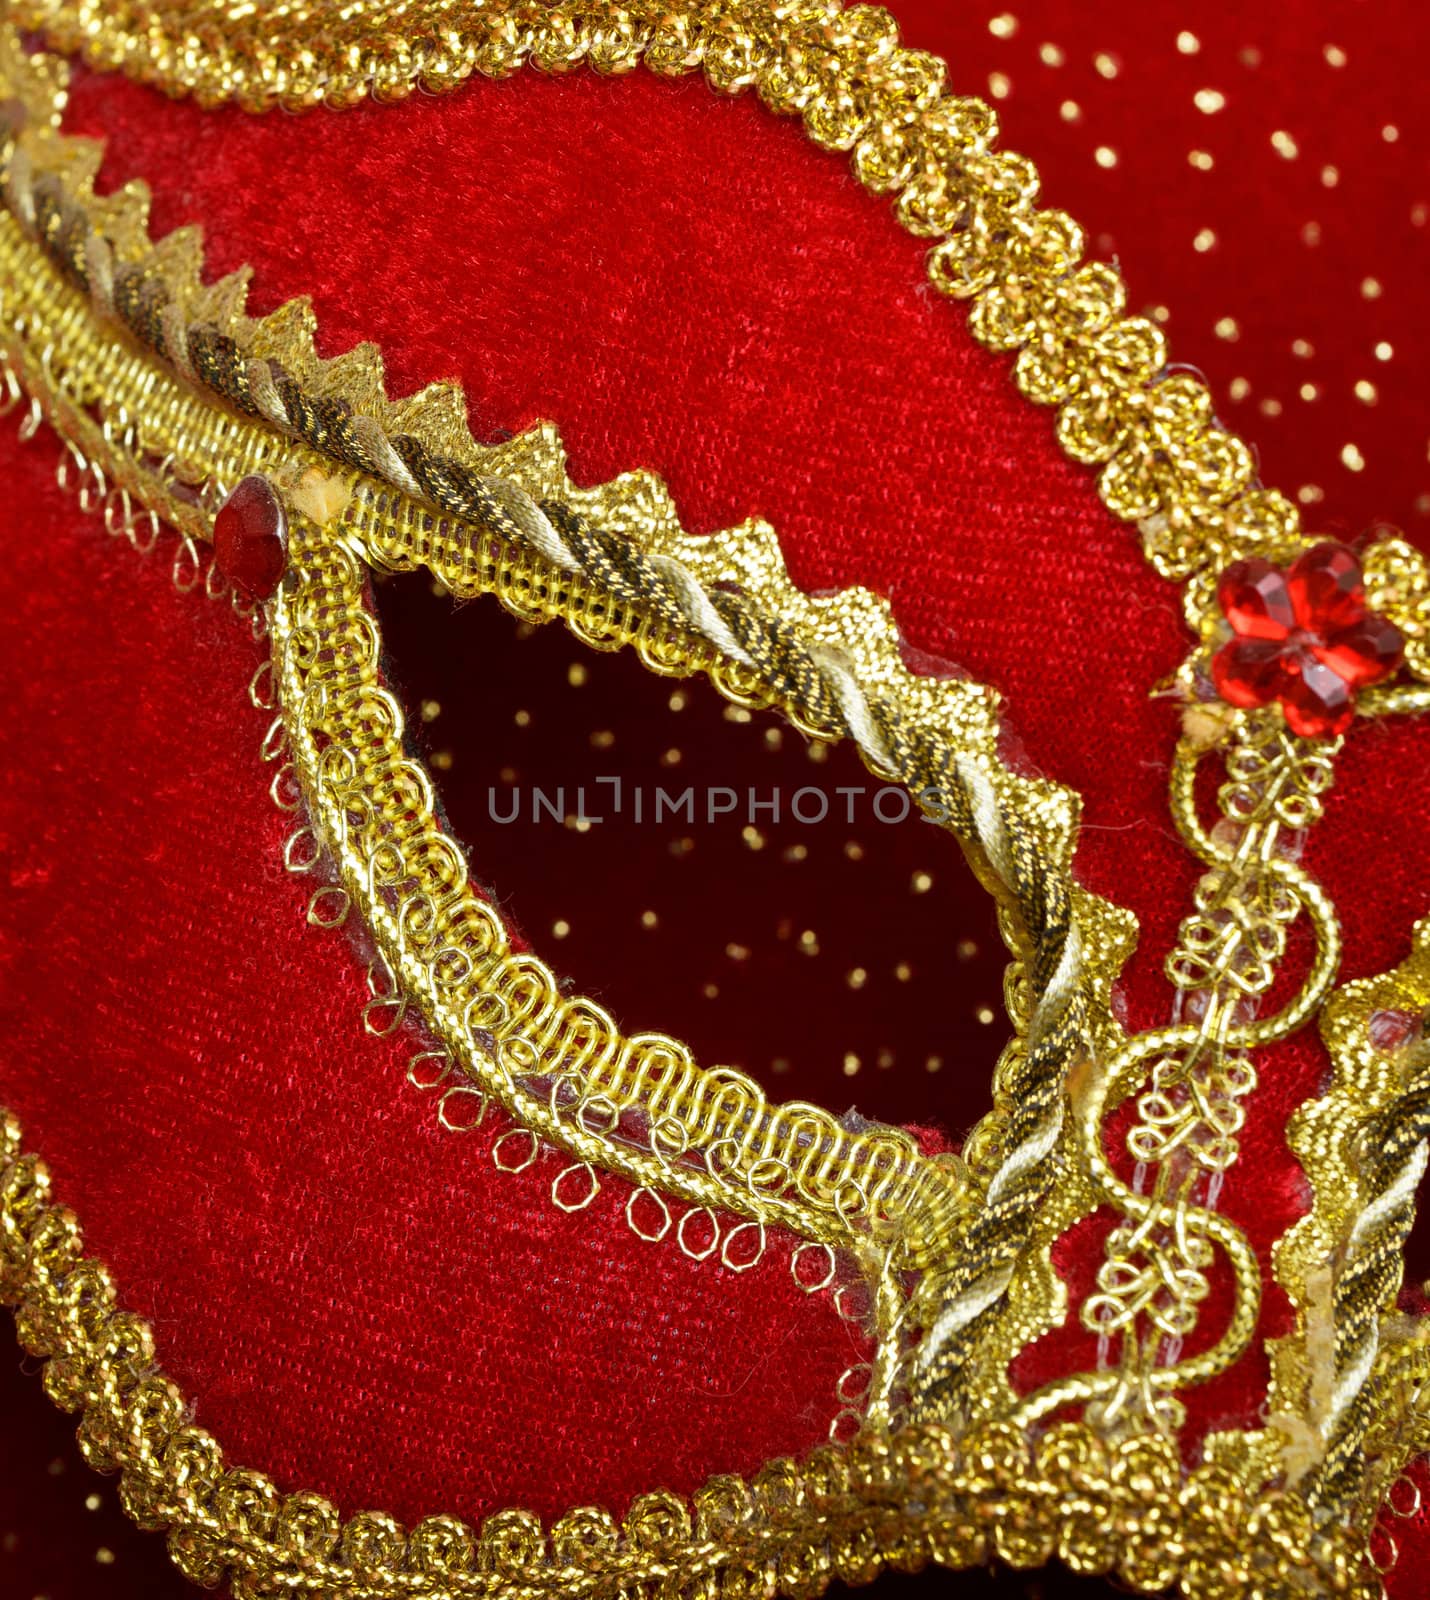 photo of fragment theatrical mask on red background